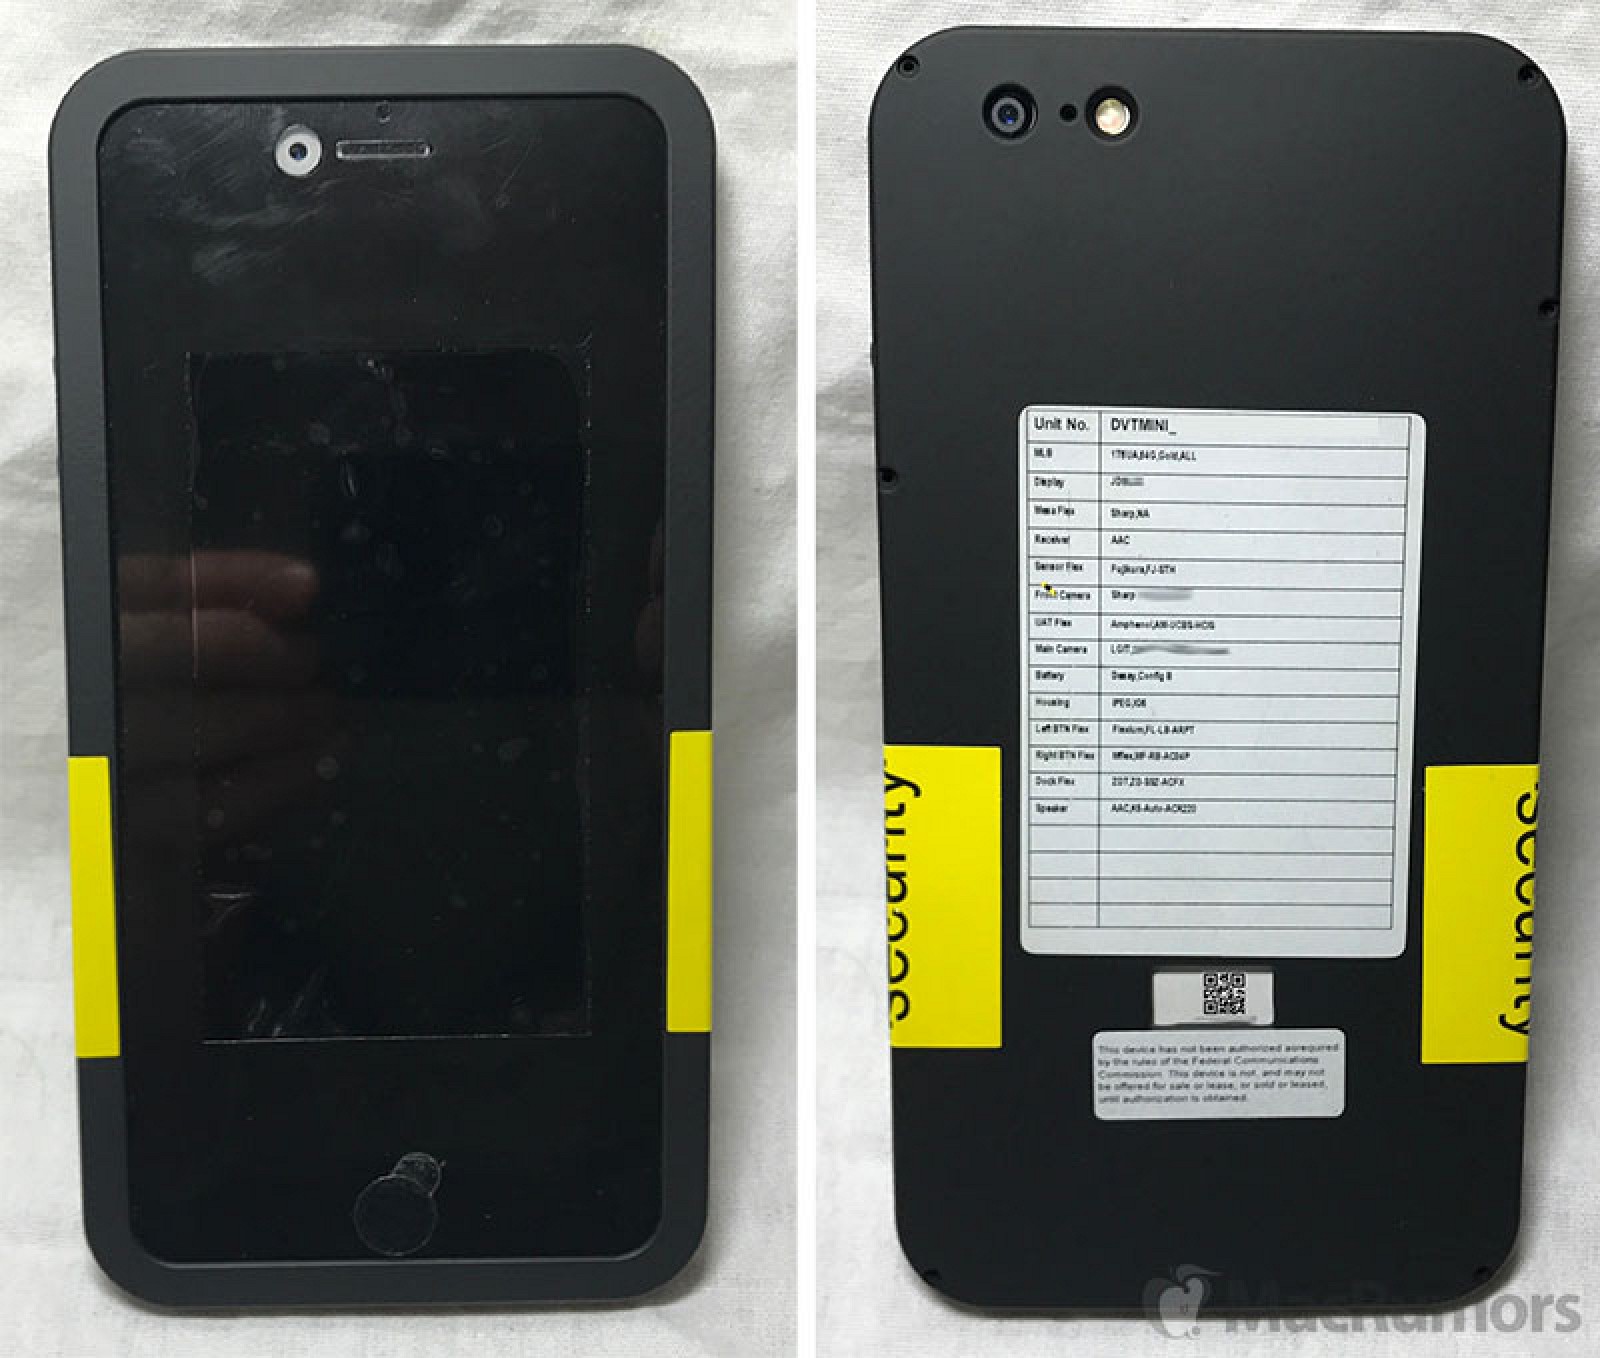 Here's the 'Stealth' Case Apple Uses to Conceal iPhone Prototypes During Transport - Mac Rumors